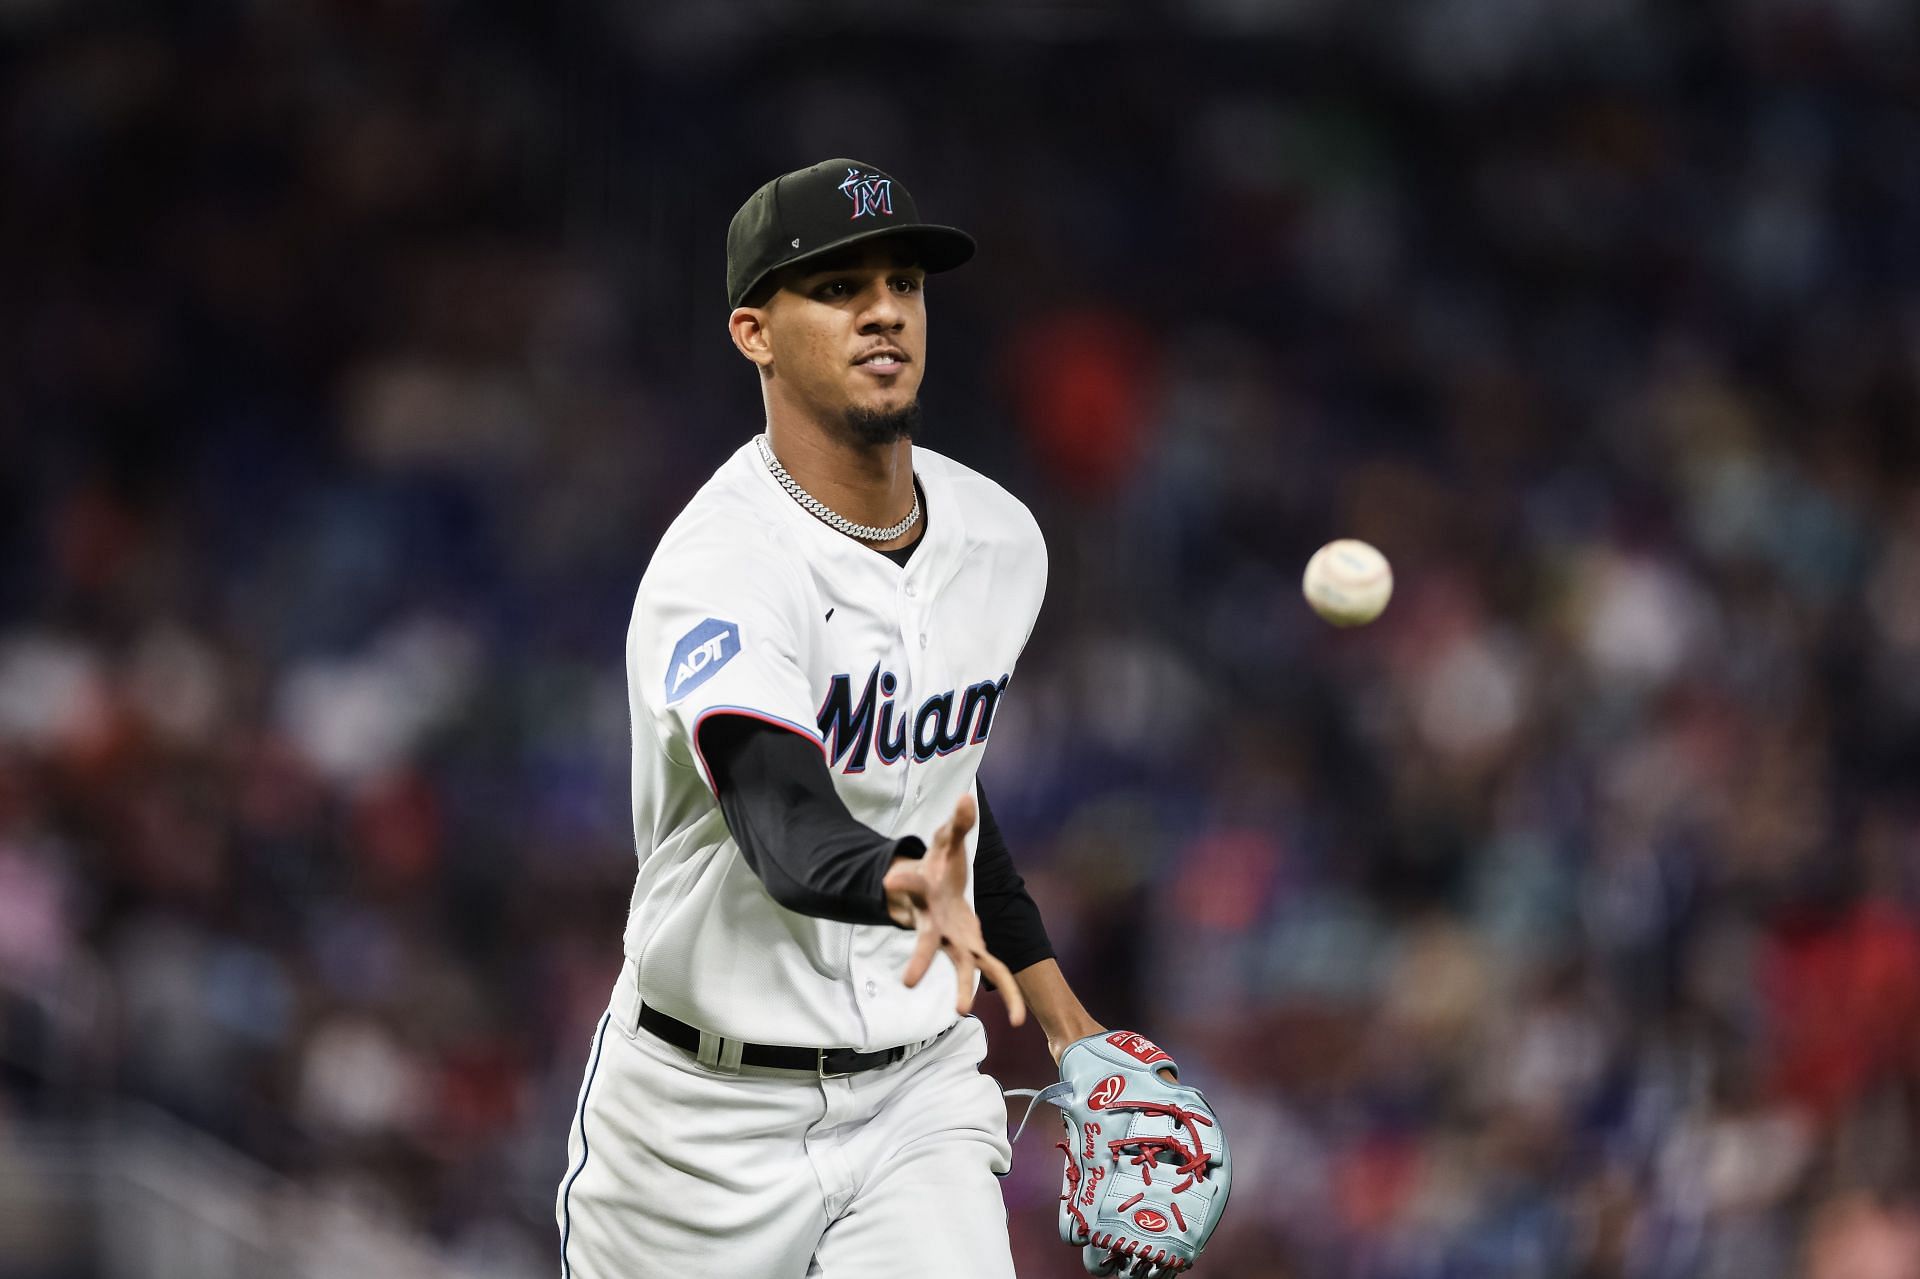 Eury Perez Injury Update: Marlins pitcher expected to return to